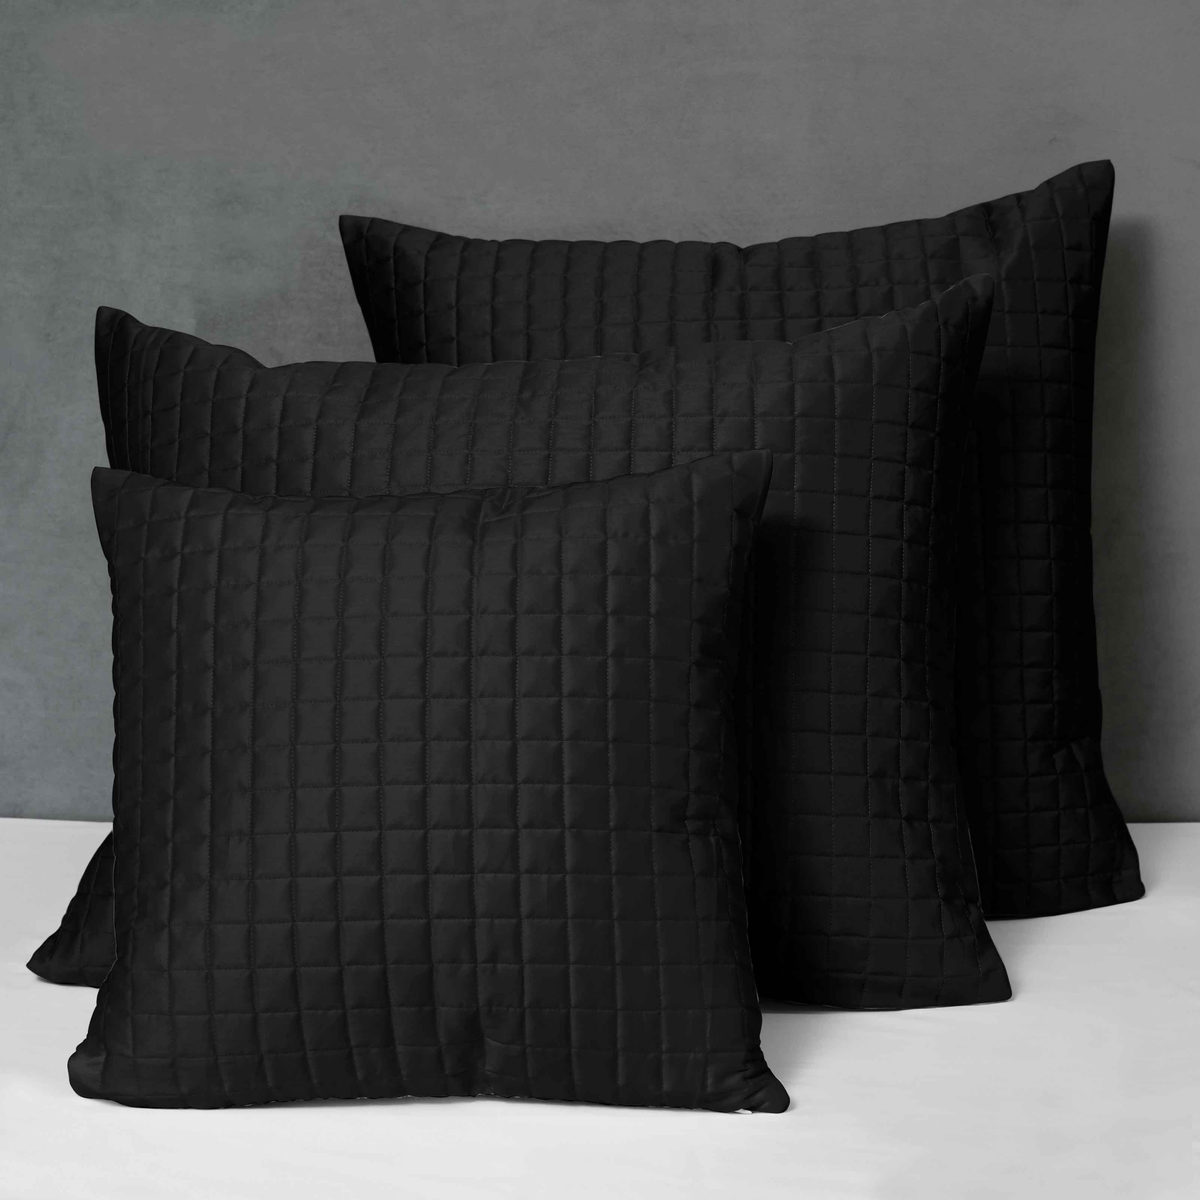 Different Sizes of Quilted Shams of Signoria Masaccio Bedding in Black Color